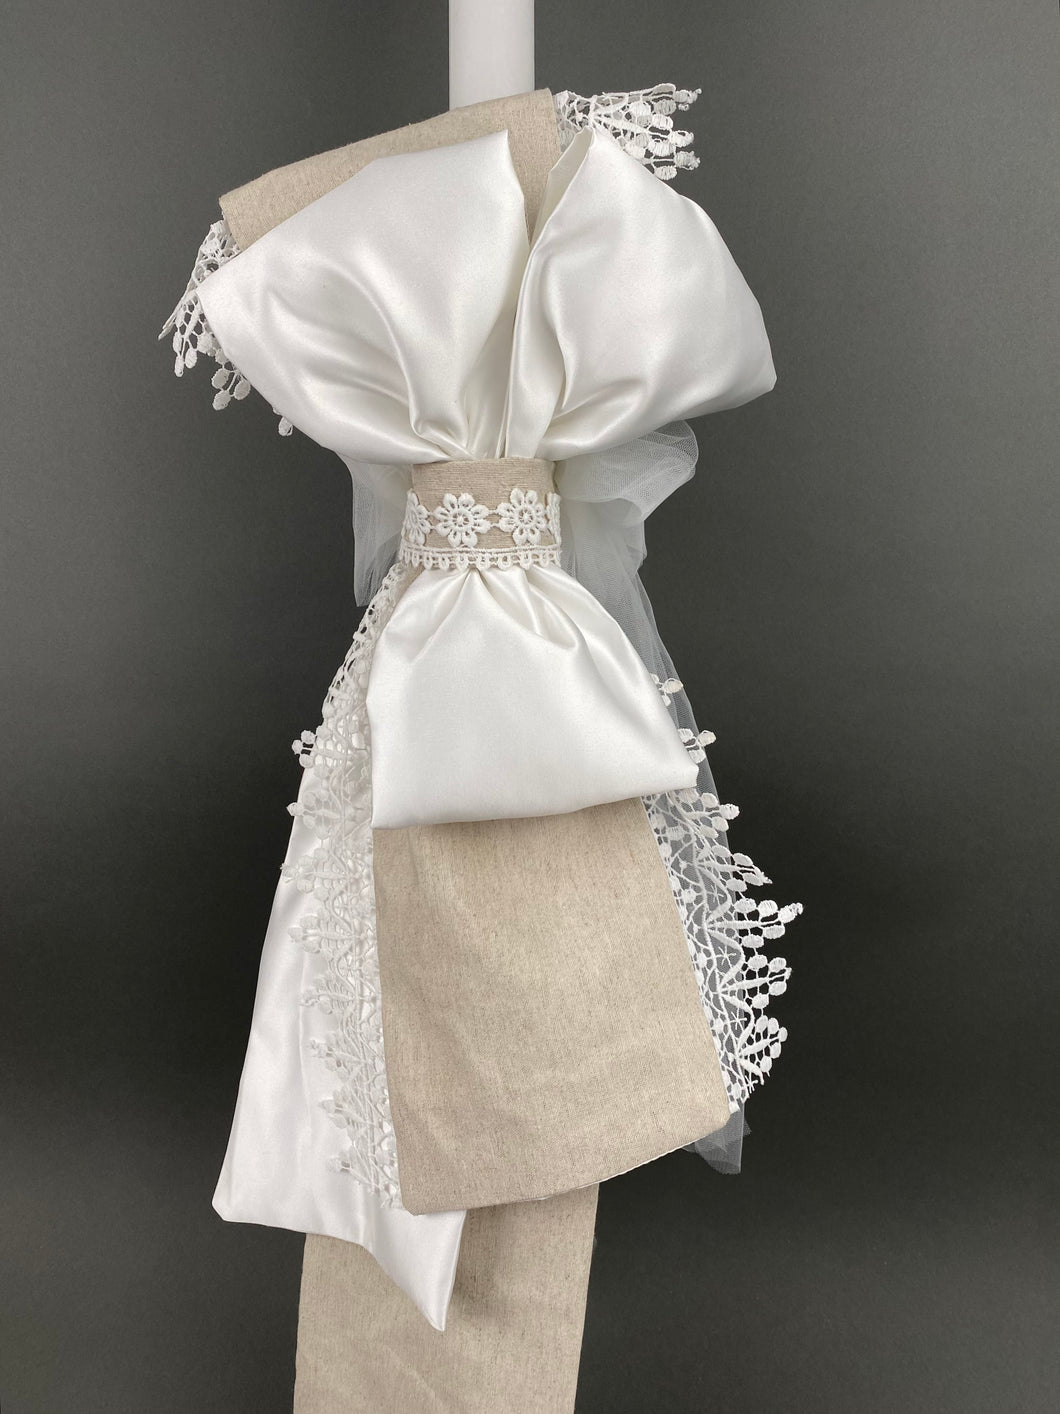 White Satin Double Bow with French Lace and Taupe Fabric 32” Baptismal Candle GC202317